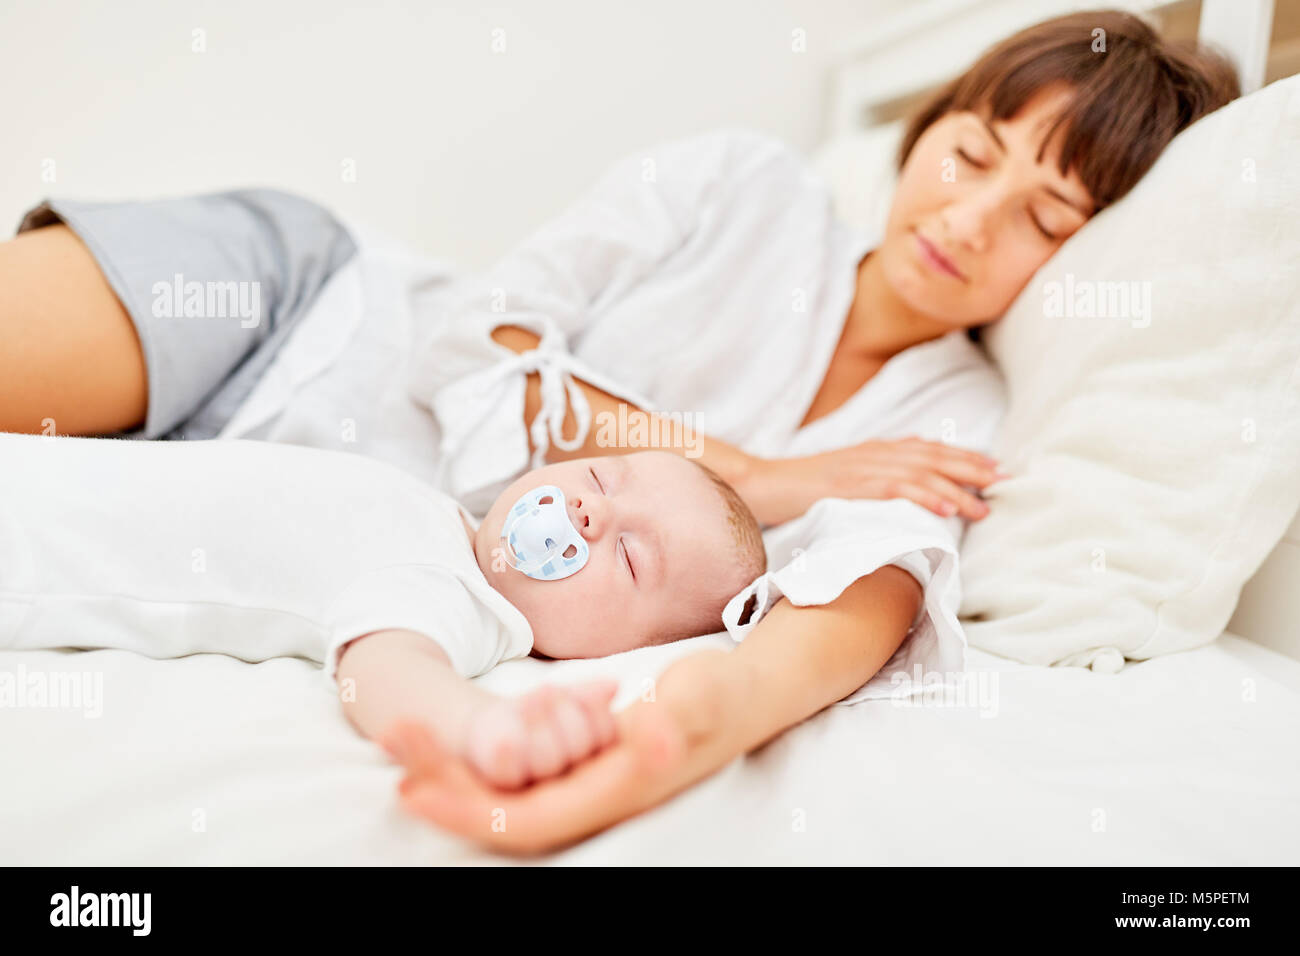 Mother and newborn baby sleep peacefully together on the bed Stock Photo